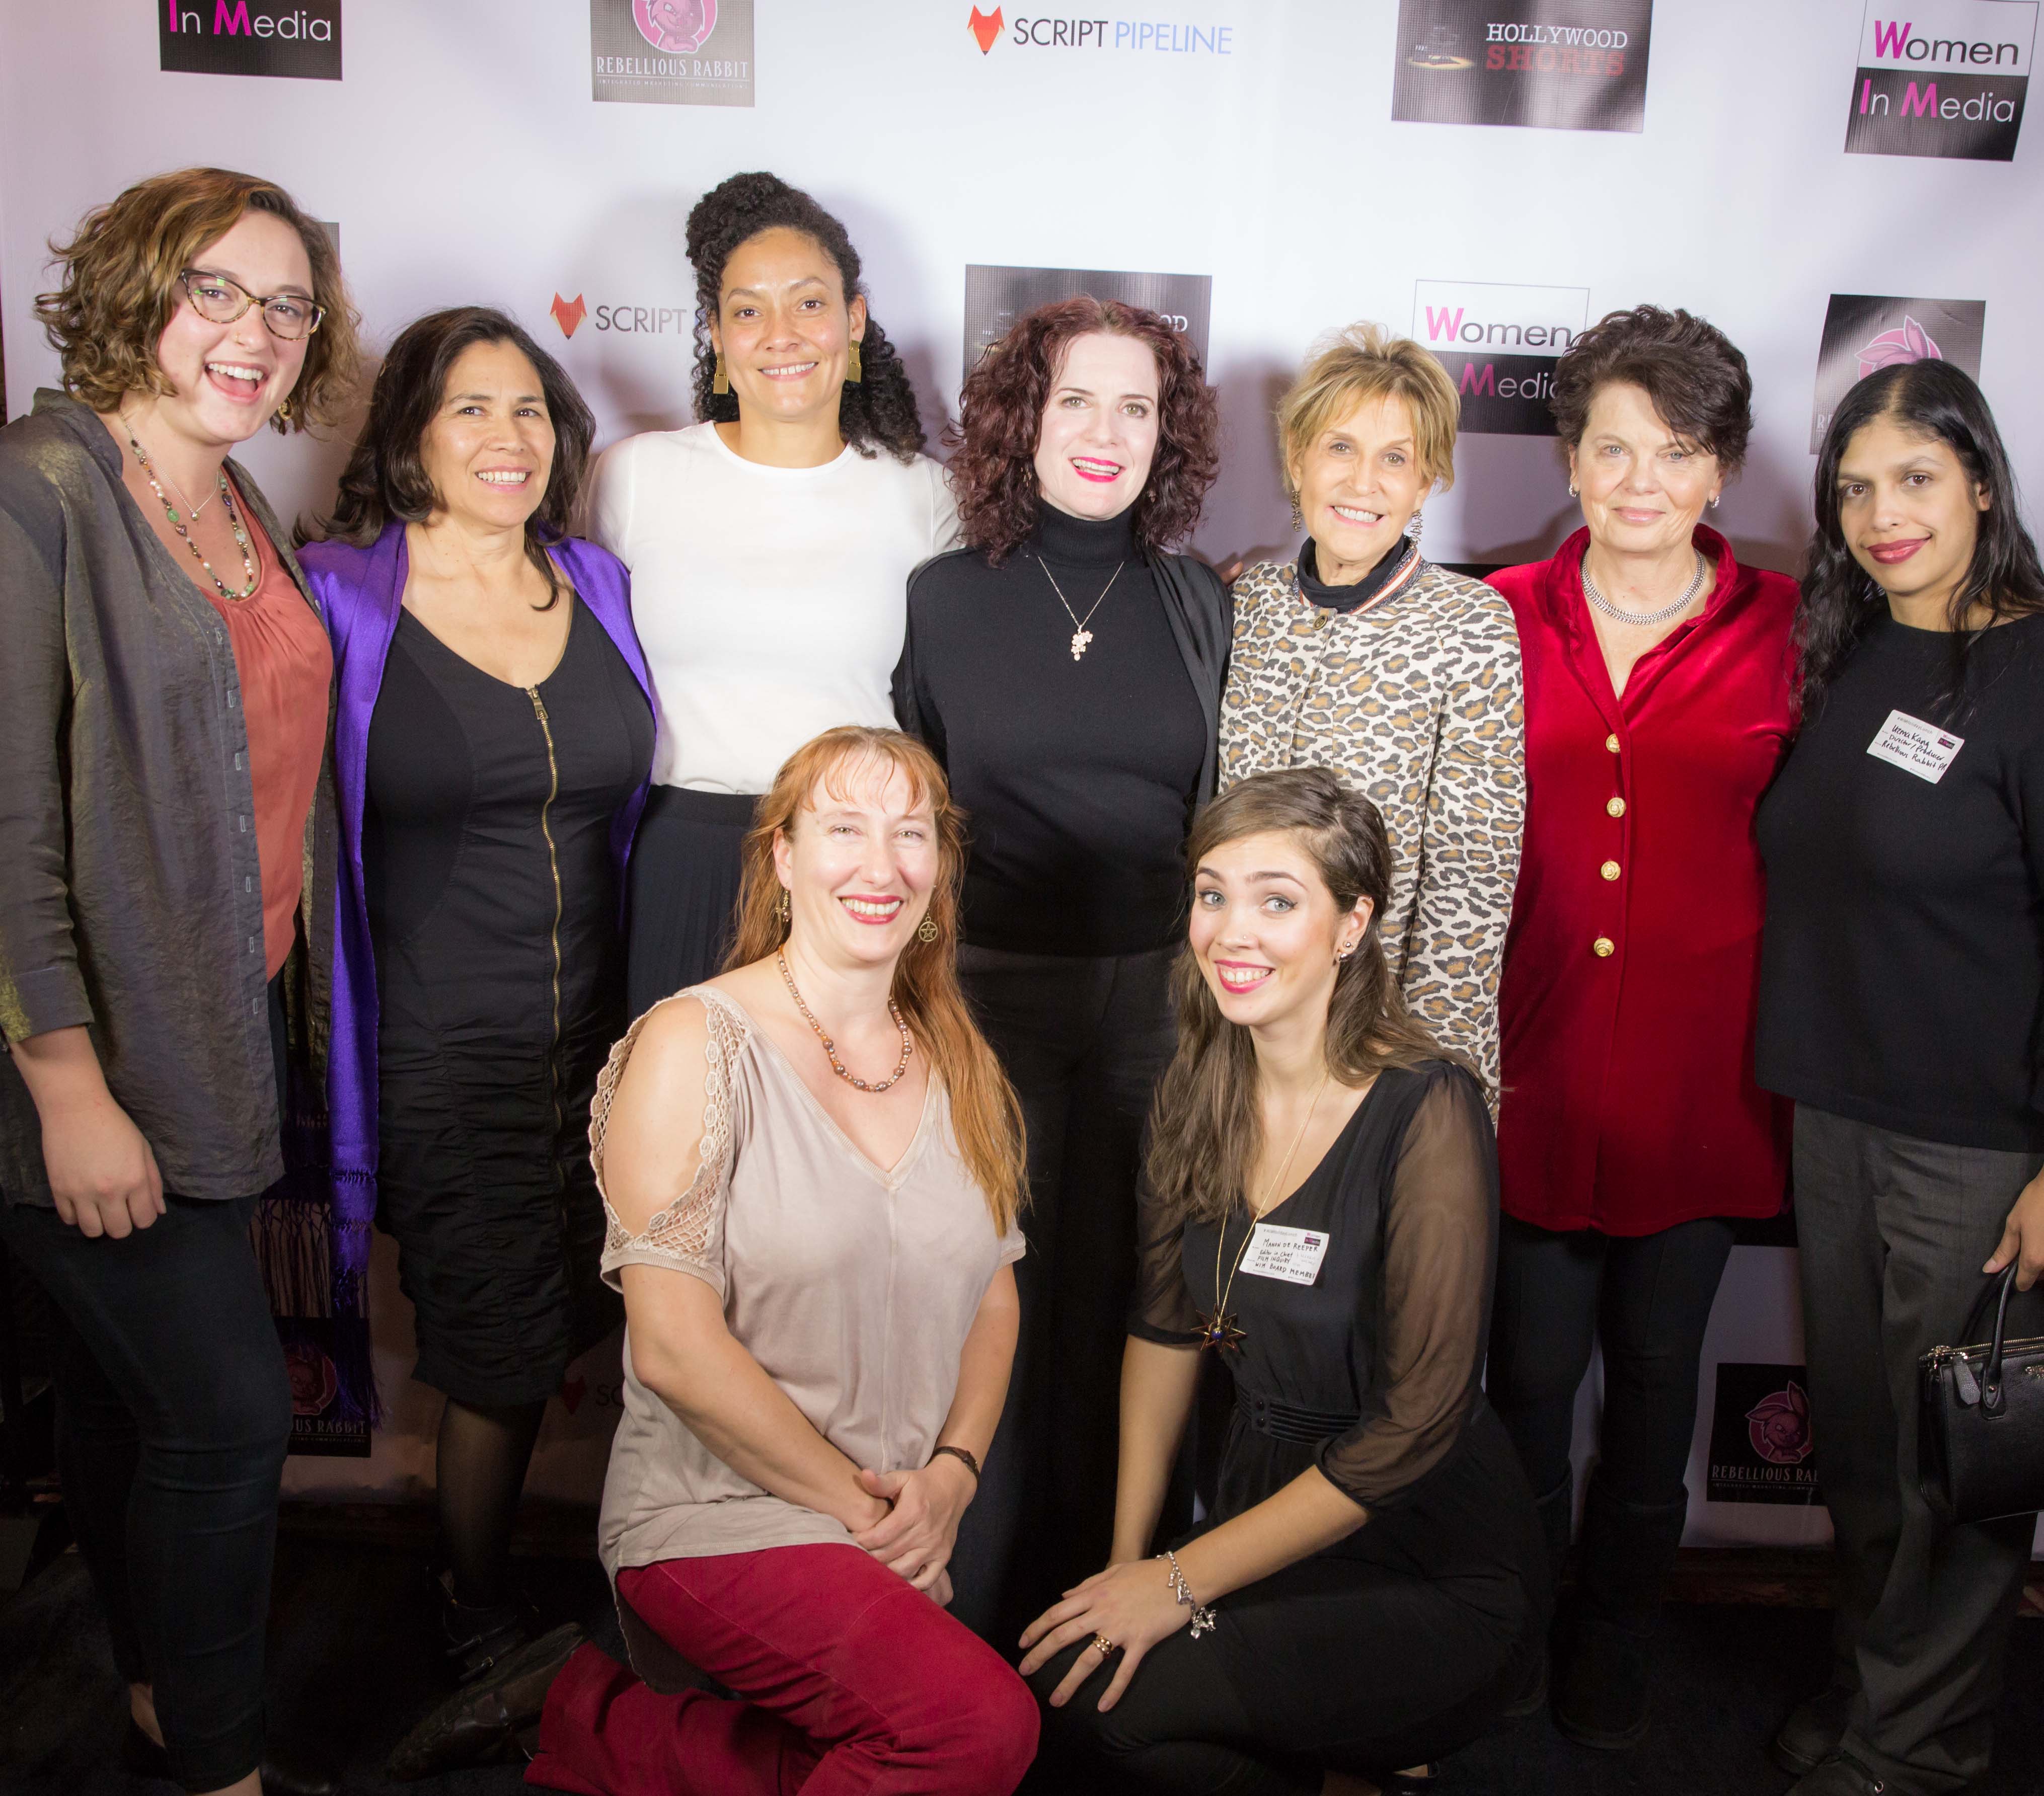 Women in Media Board Members, Panelists, and Committee Chair for the Holiday Party